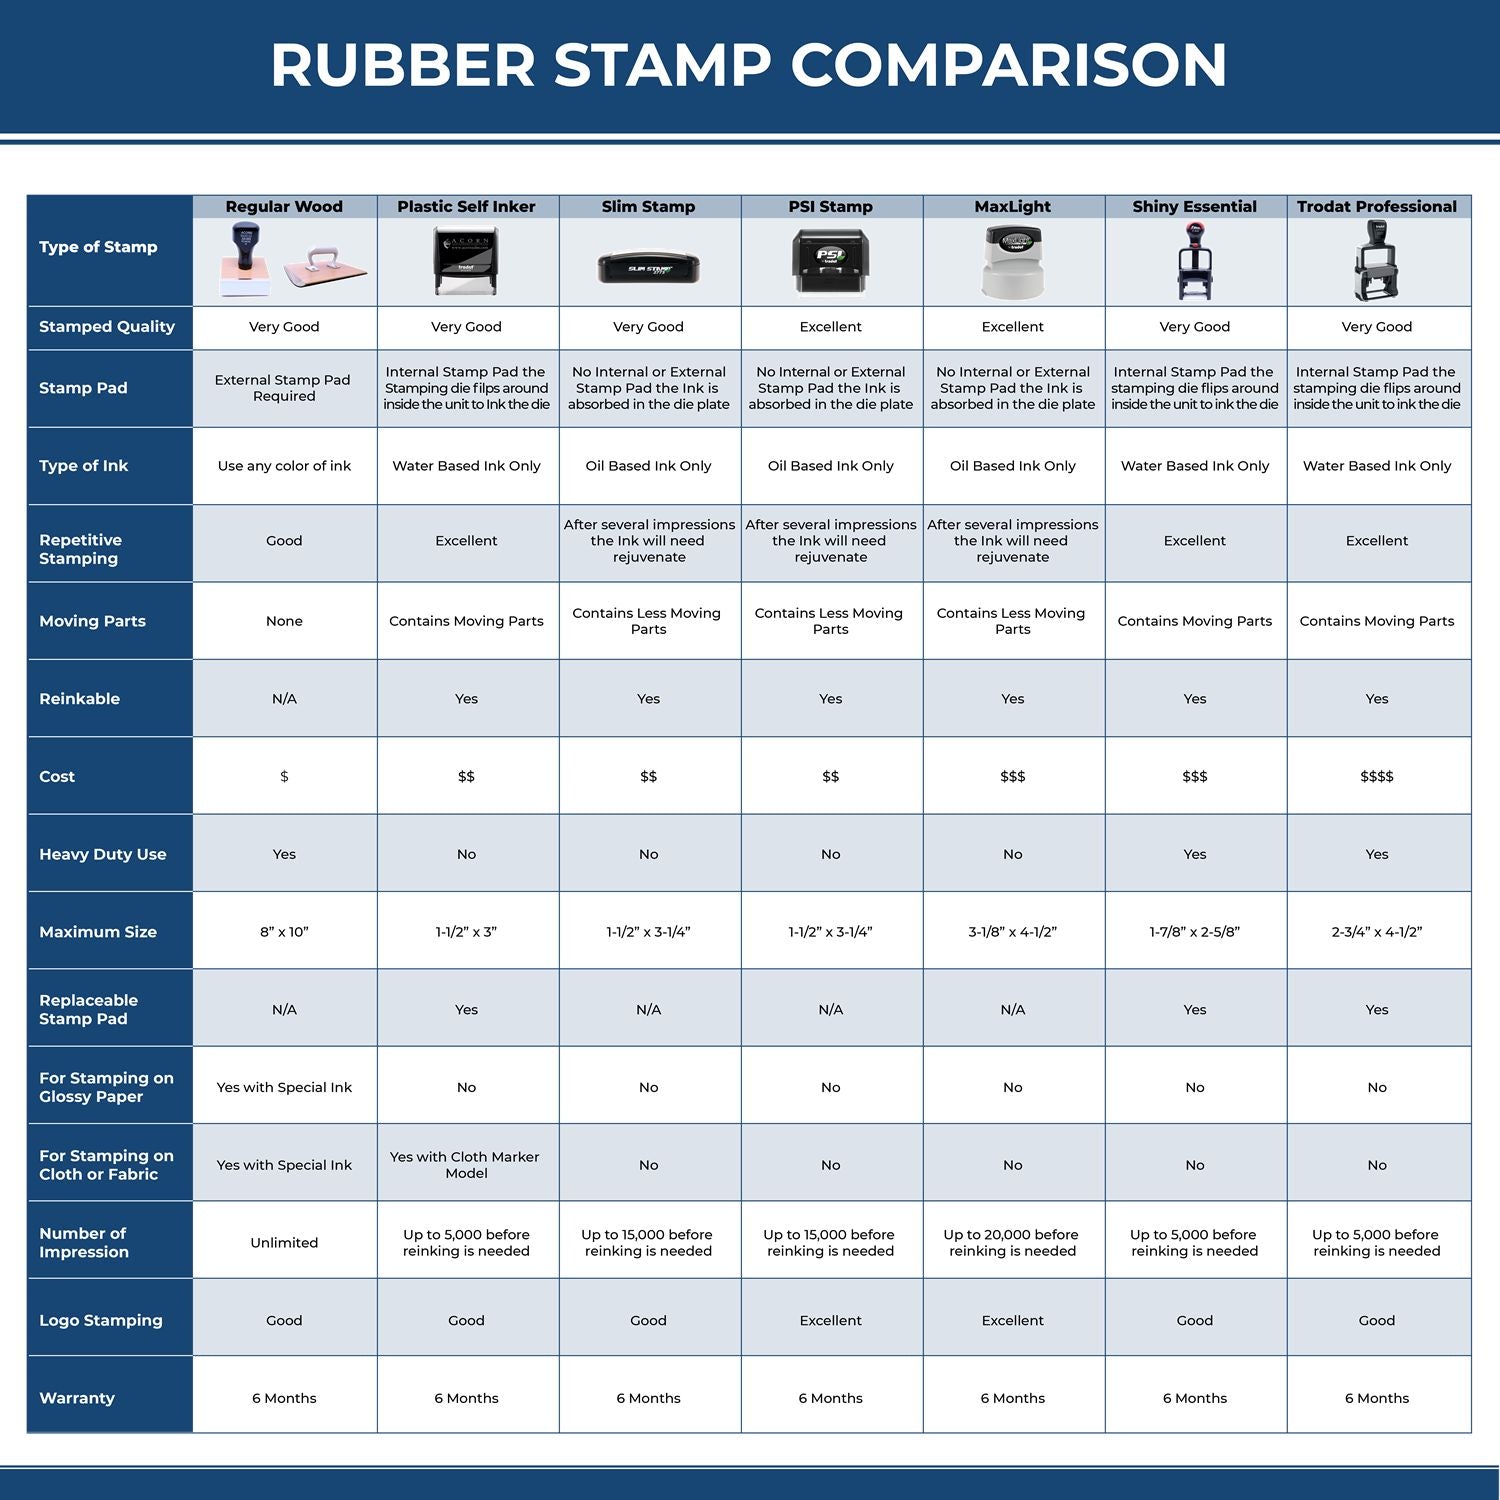 Large Pre-Inked Two Thumbs Up with Thumb Icon Stamp 5625SLIM Rubber Stamp Comparison